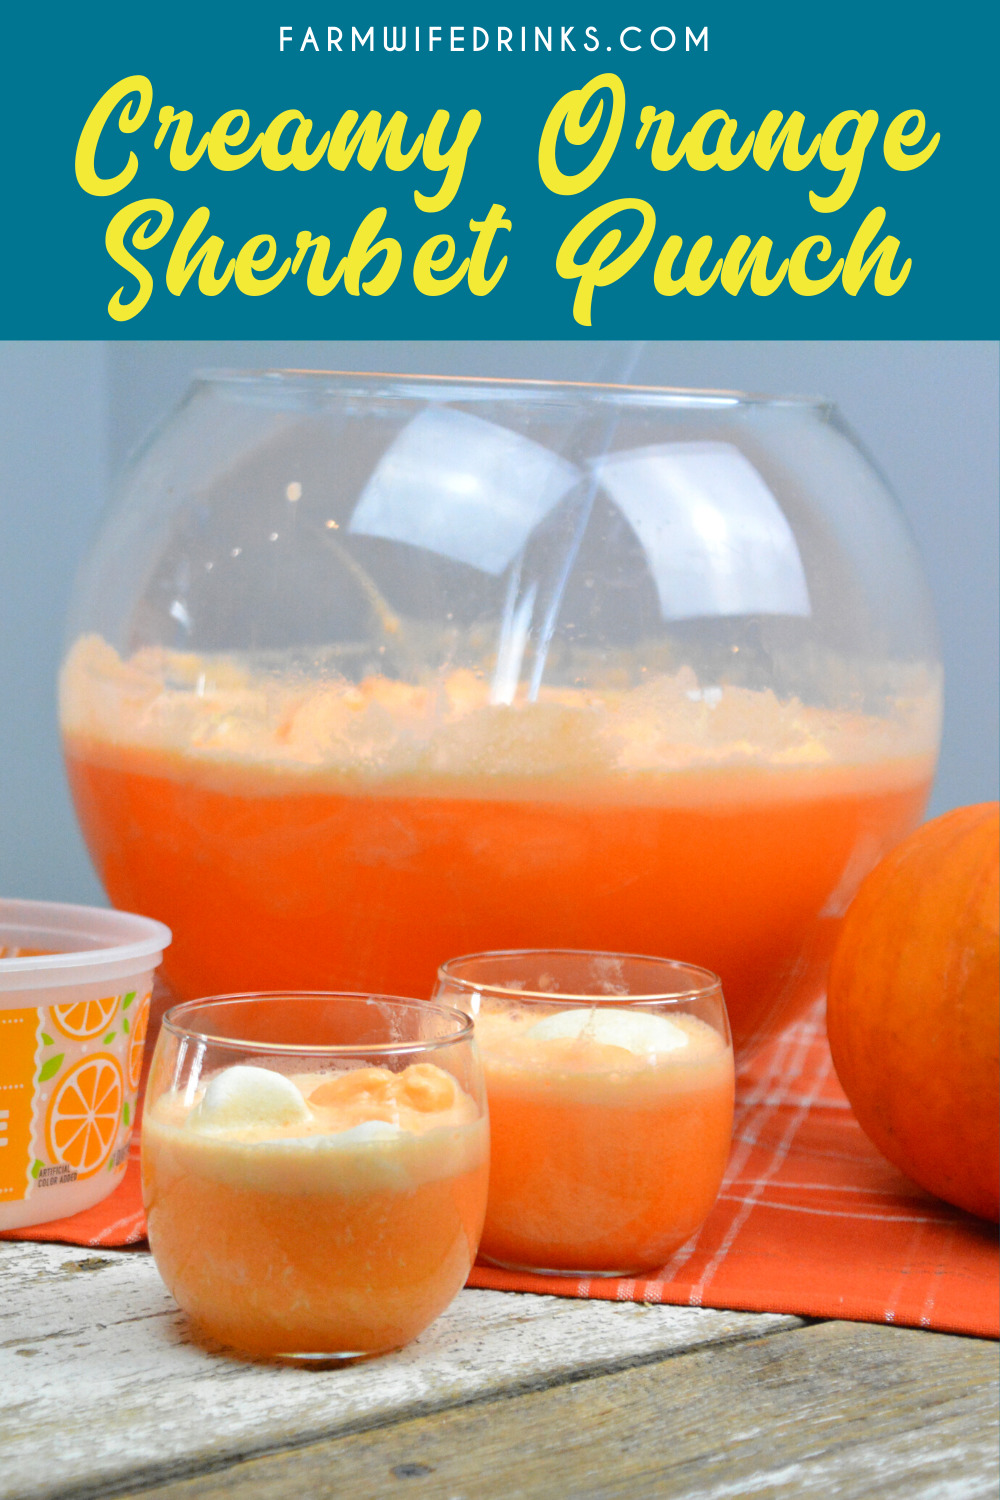 Creamy Sherbet Orange punch can be the sweet combination of sherbet, vanilla ice cream with orange Hawaiian Punch and a bit of Sprite to give it a little fizz.